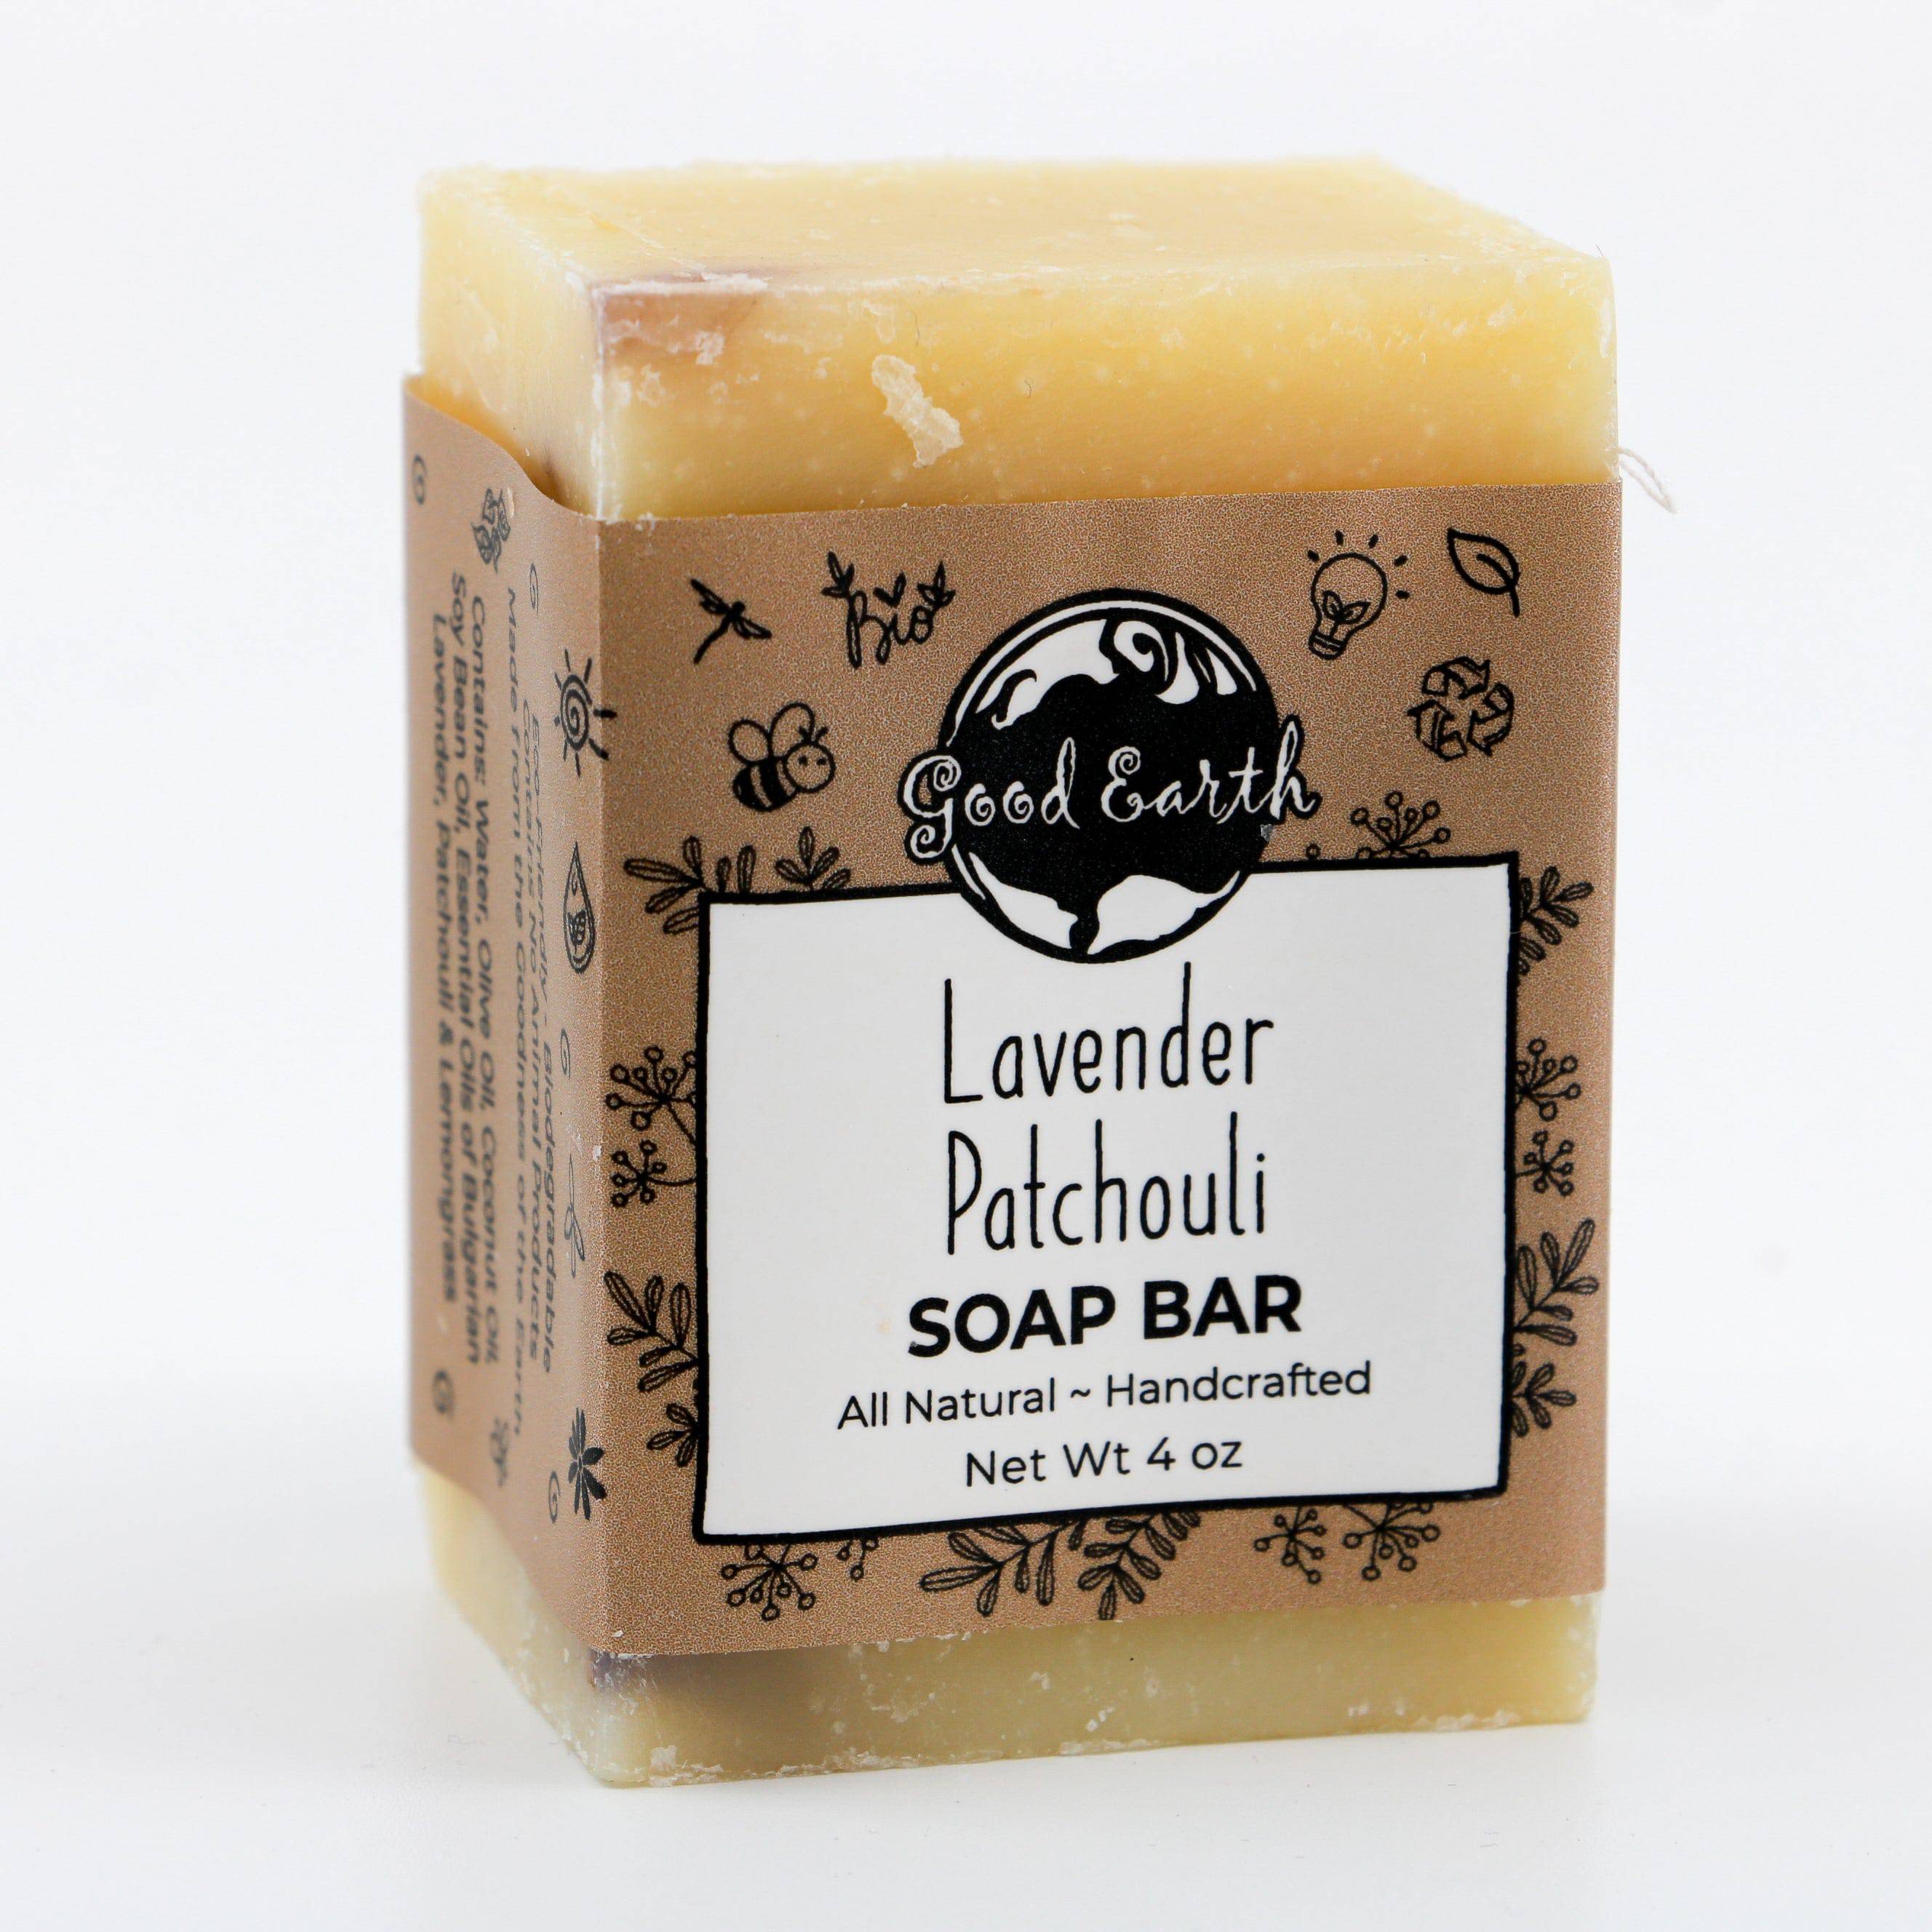 Lavender Patchouli Handmade Soap - The Mockingbird Apothecary & General Store